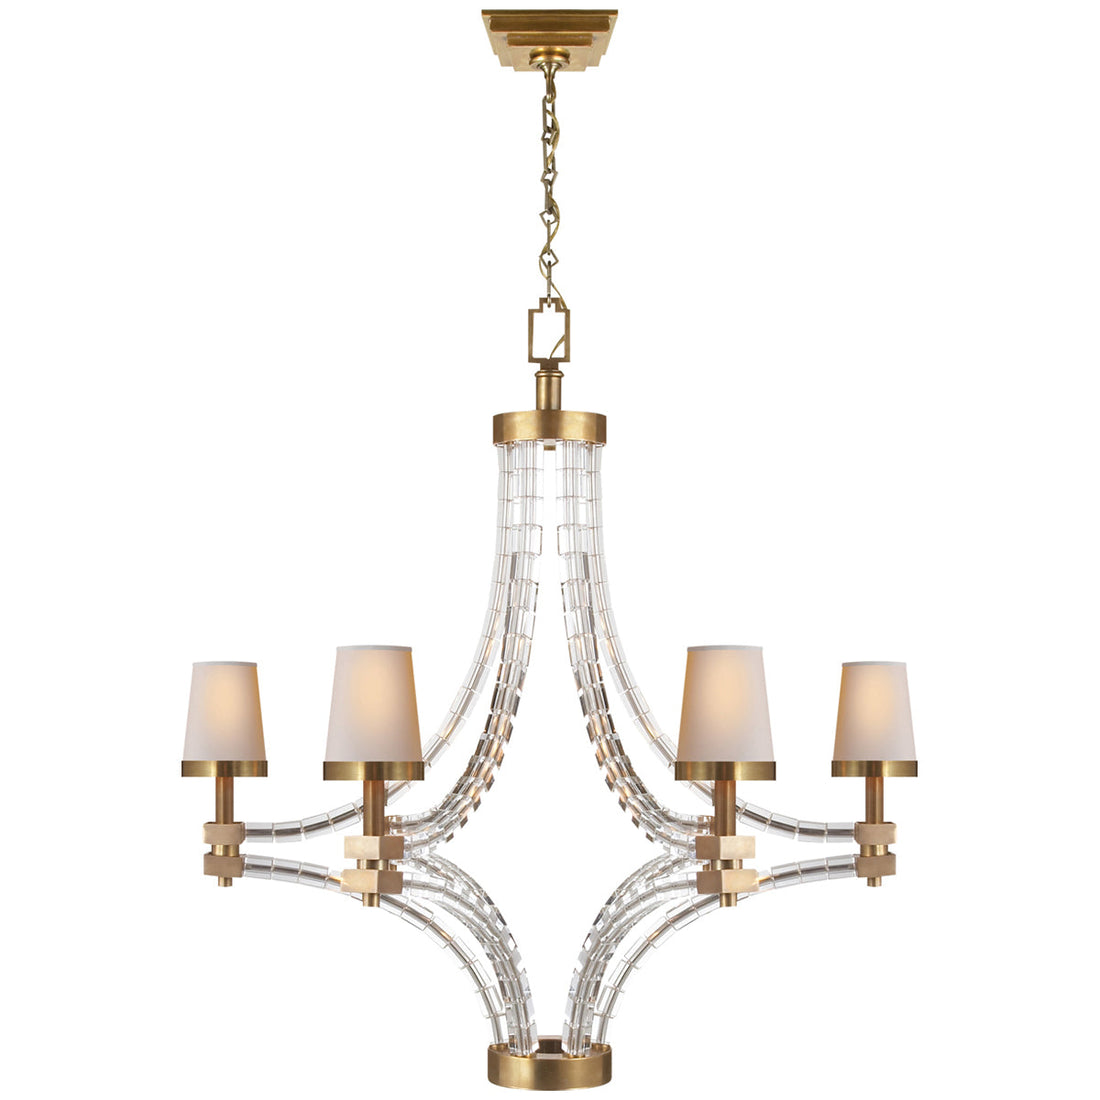 Visual Comfort Crystal Cube Large Chandelier